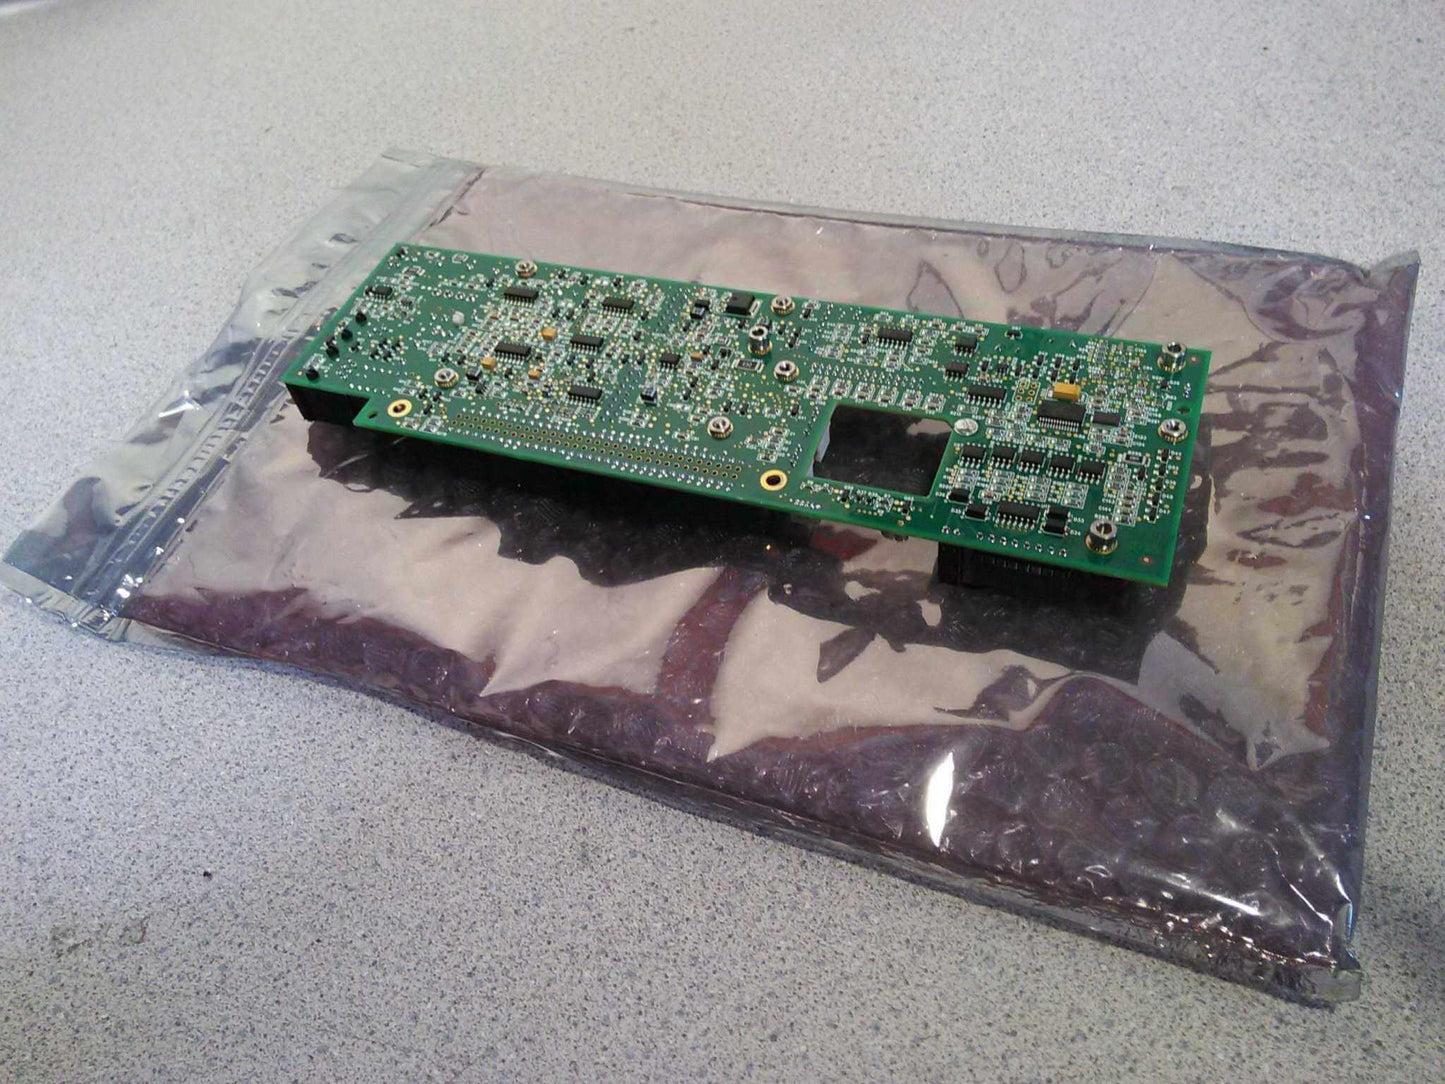 USED PCB Board Part of PM Kit For LTV-1000 LTV-950 Ventilator 21330001A Warranty FREE Shipping - MBR Medicals